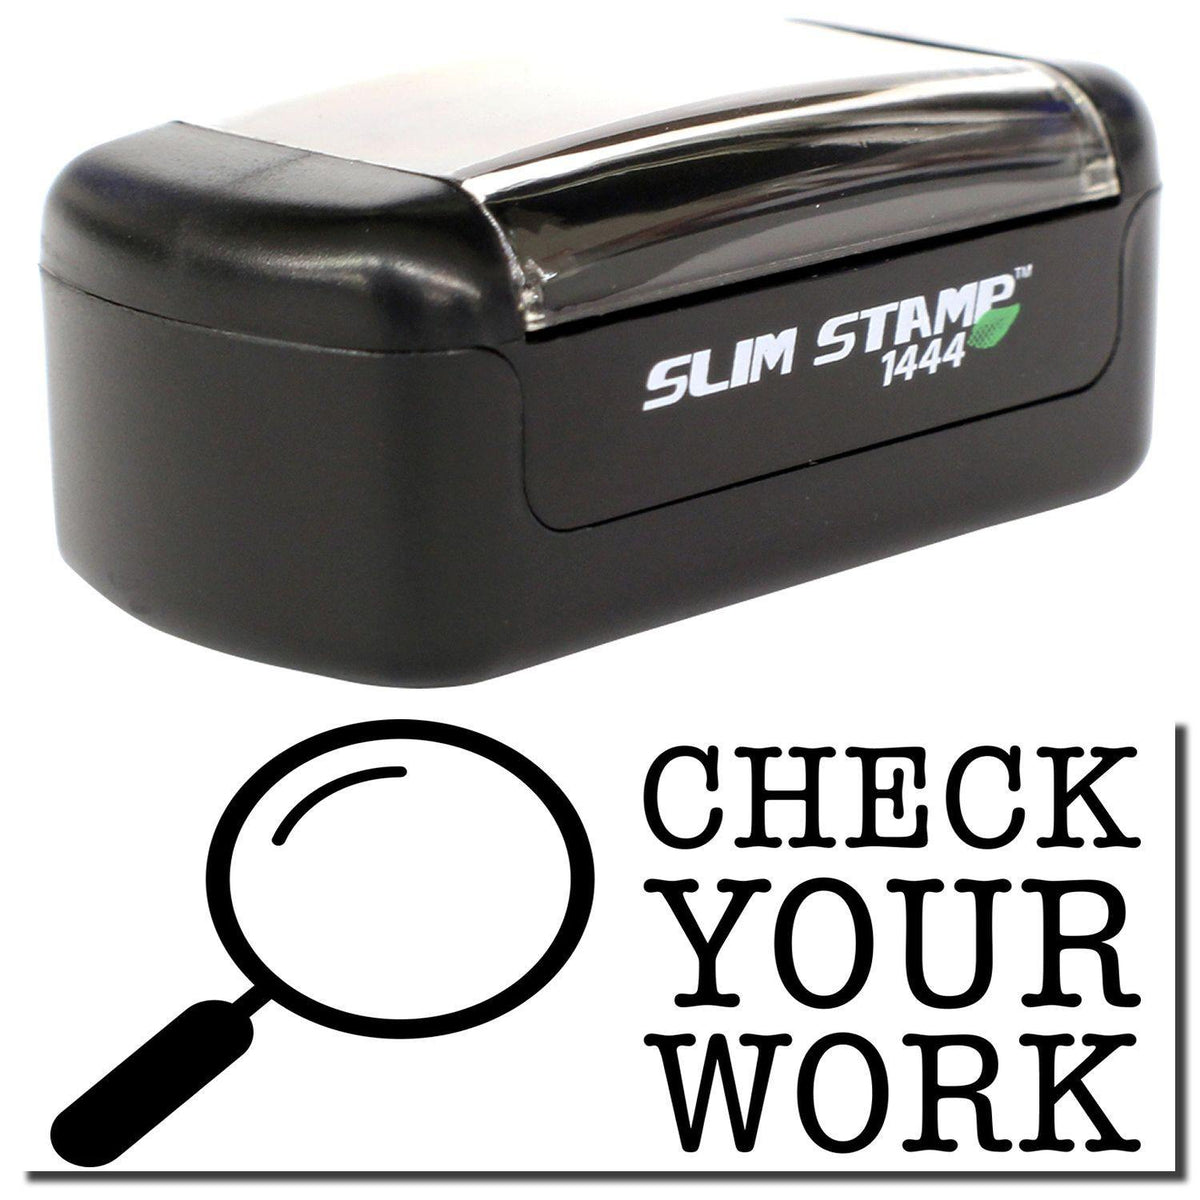 A stock office pre-inked stamp with a stamped image showing how the text &quot;CHECK YOUR WORK&quot; with a magnifying glass image on the left side is displayed after stamping.